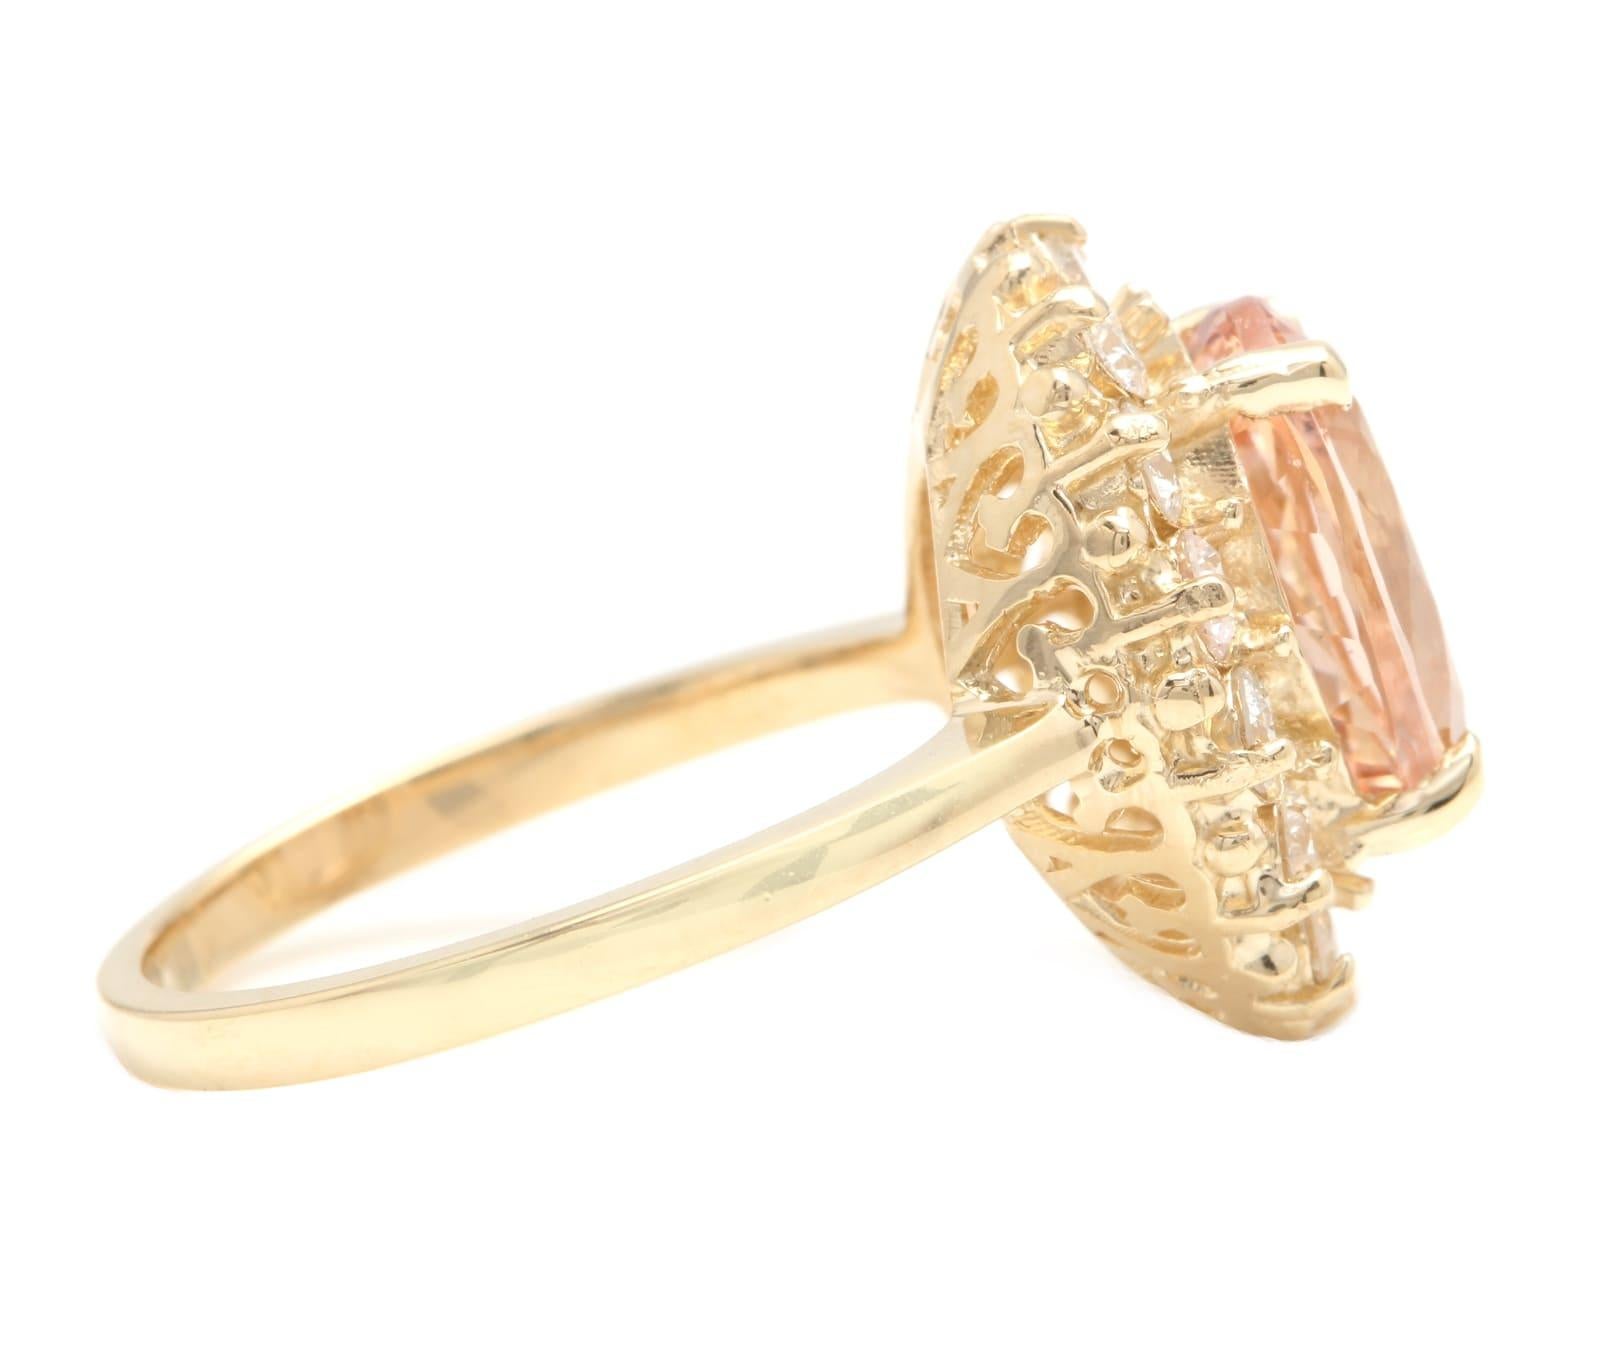 4.50 Carats Impressive Natural Morganite and Diamond 14K Solid Yellow Gold Ring

Suggested Replacement Value: Approx. $6,000.00

Total Morganite Weight is: Approx. 3.50 Carats

Morganite Treatment: Heating

Morganite Measures: Approx. 11.00 x